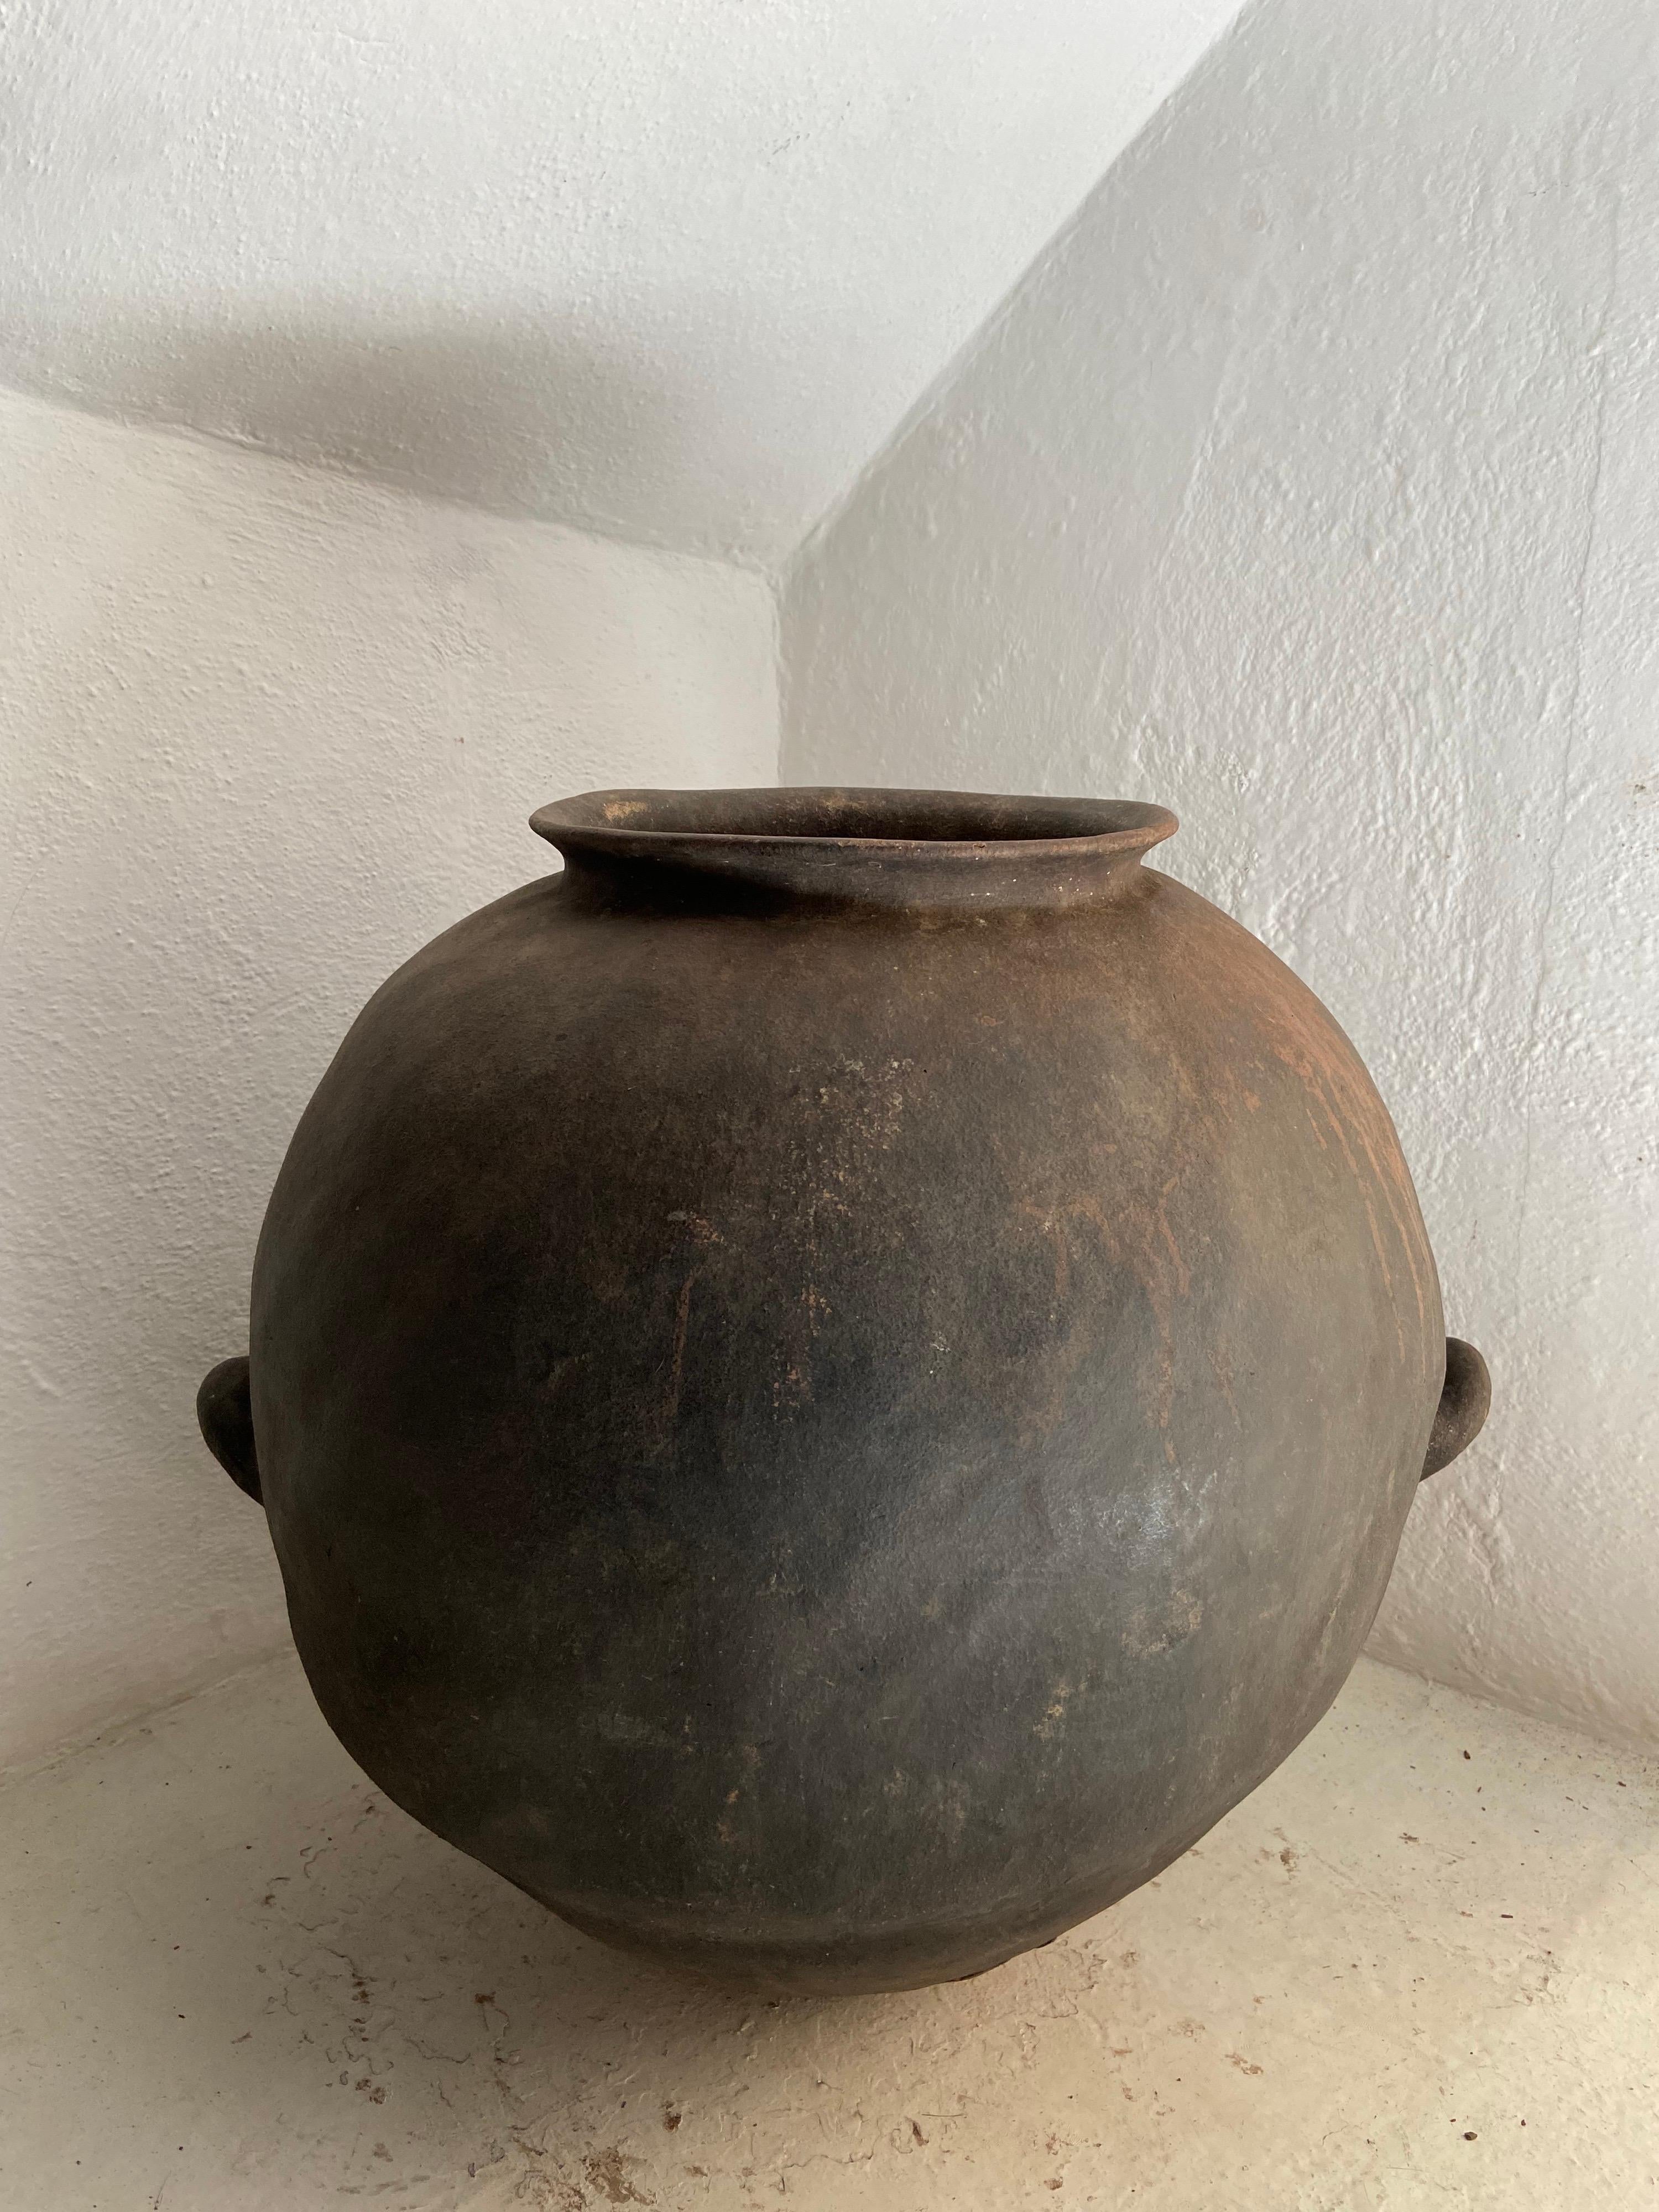 Late 19th century water pot from the highlands of Puebla, Mexico. This style of pottery is indigenous to the Nahua communities of the northern area of the state. The style is furthermore apparent by the wide, rounded body design and low, small